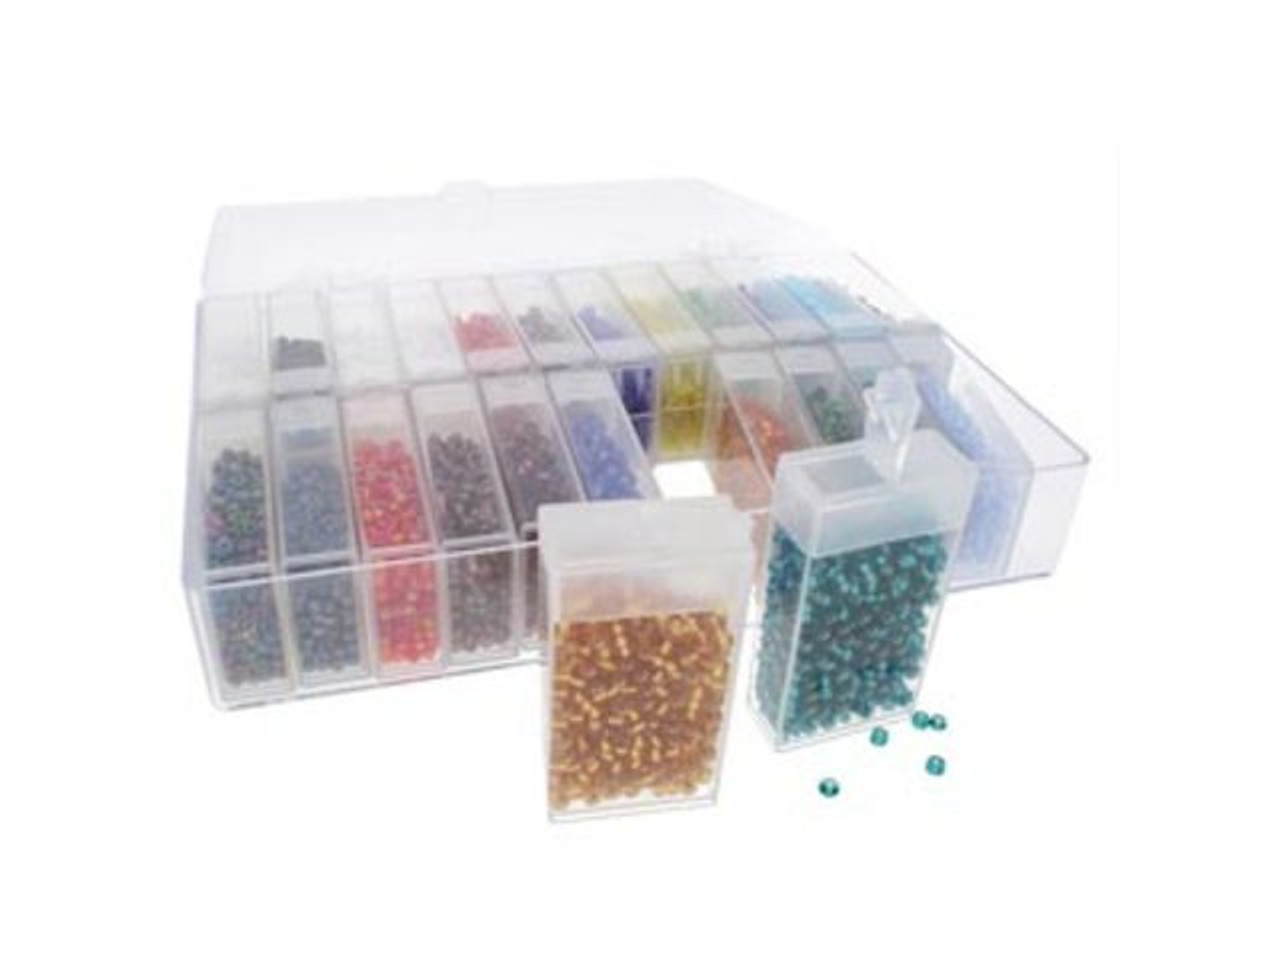 Multicolor Glass Seed Beads Set by Bead Landing™